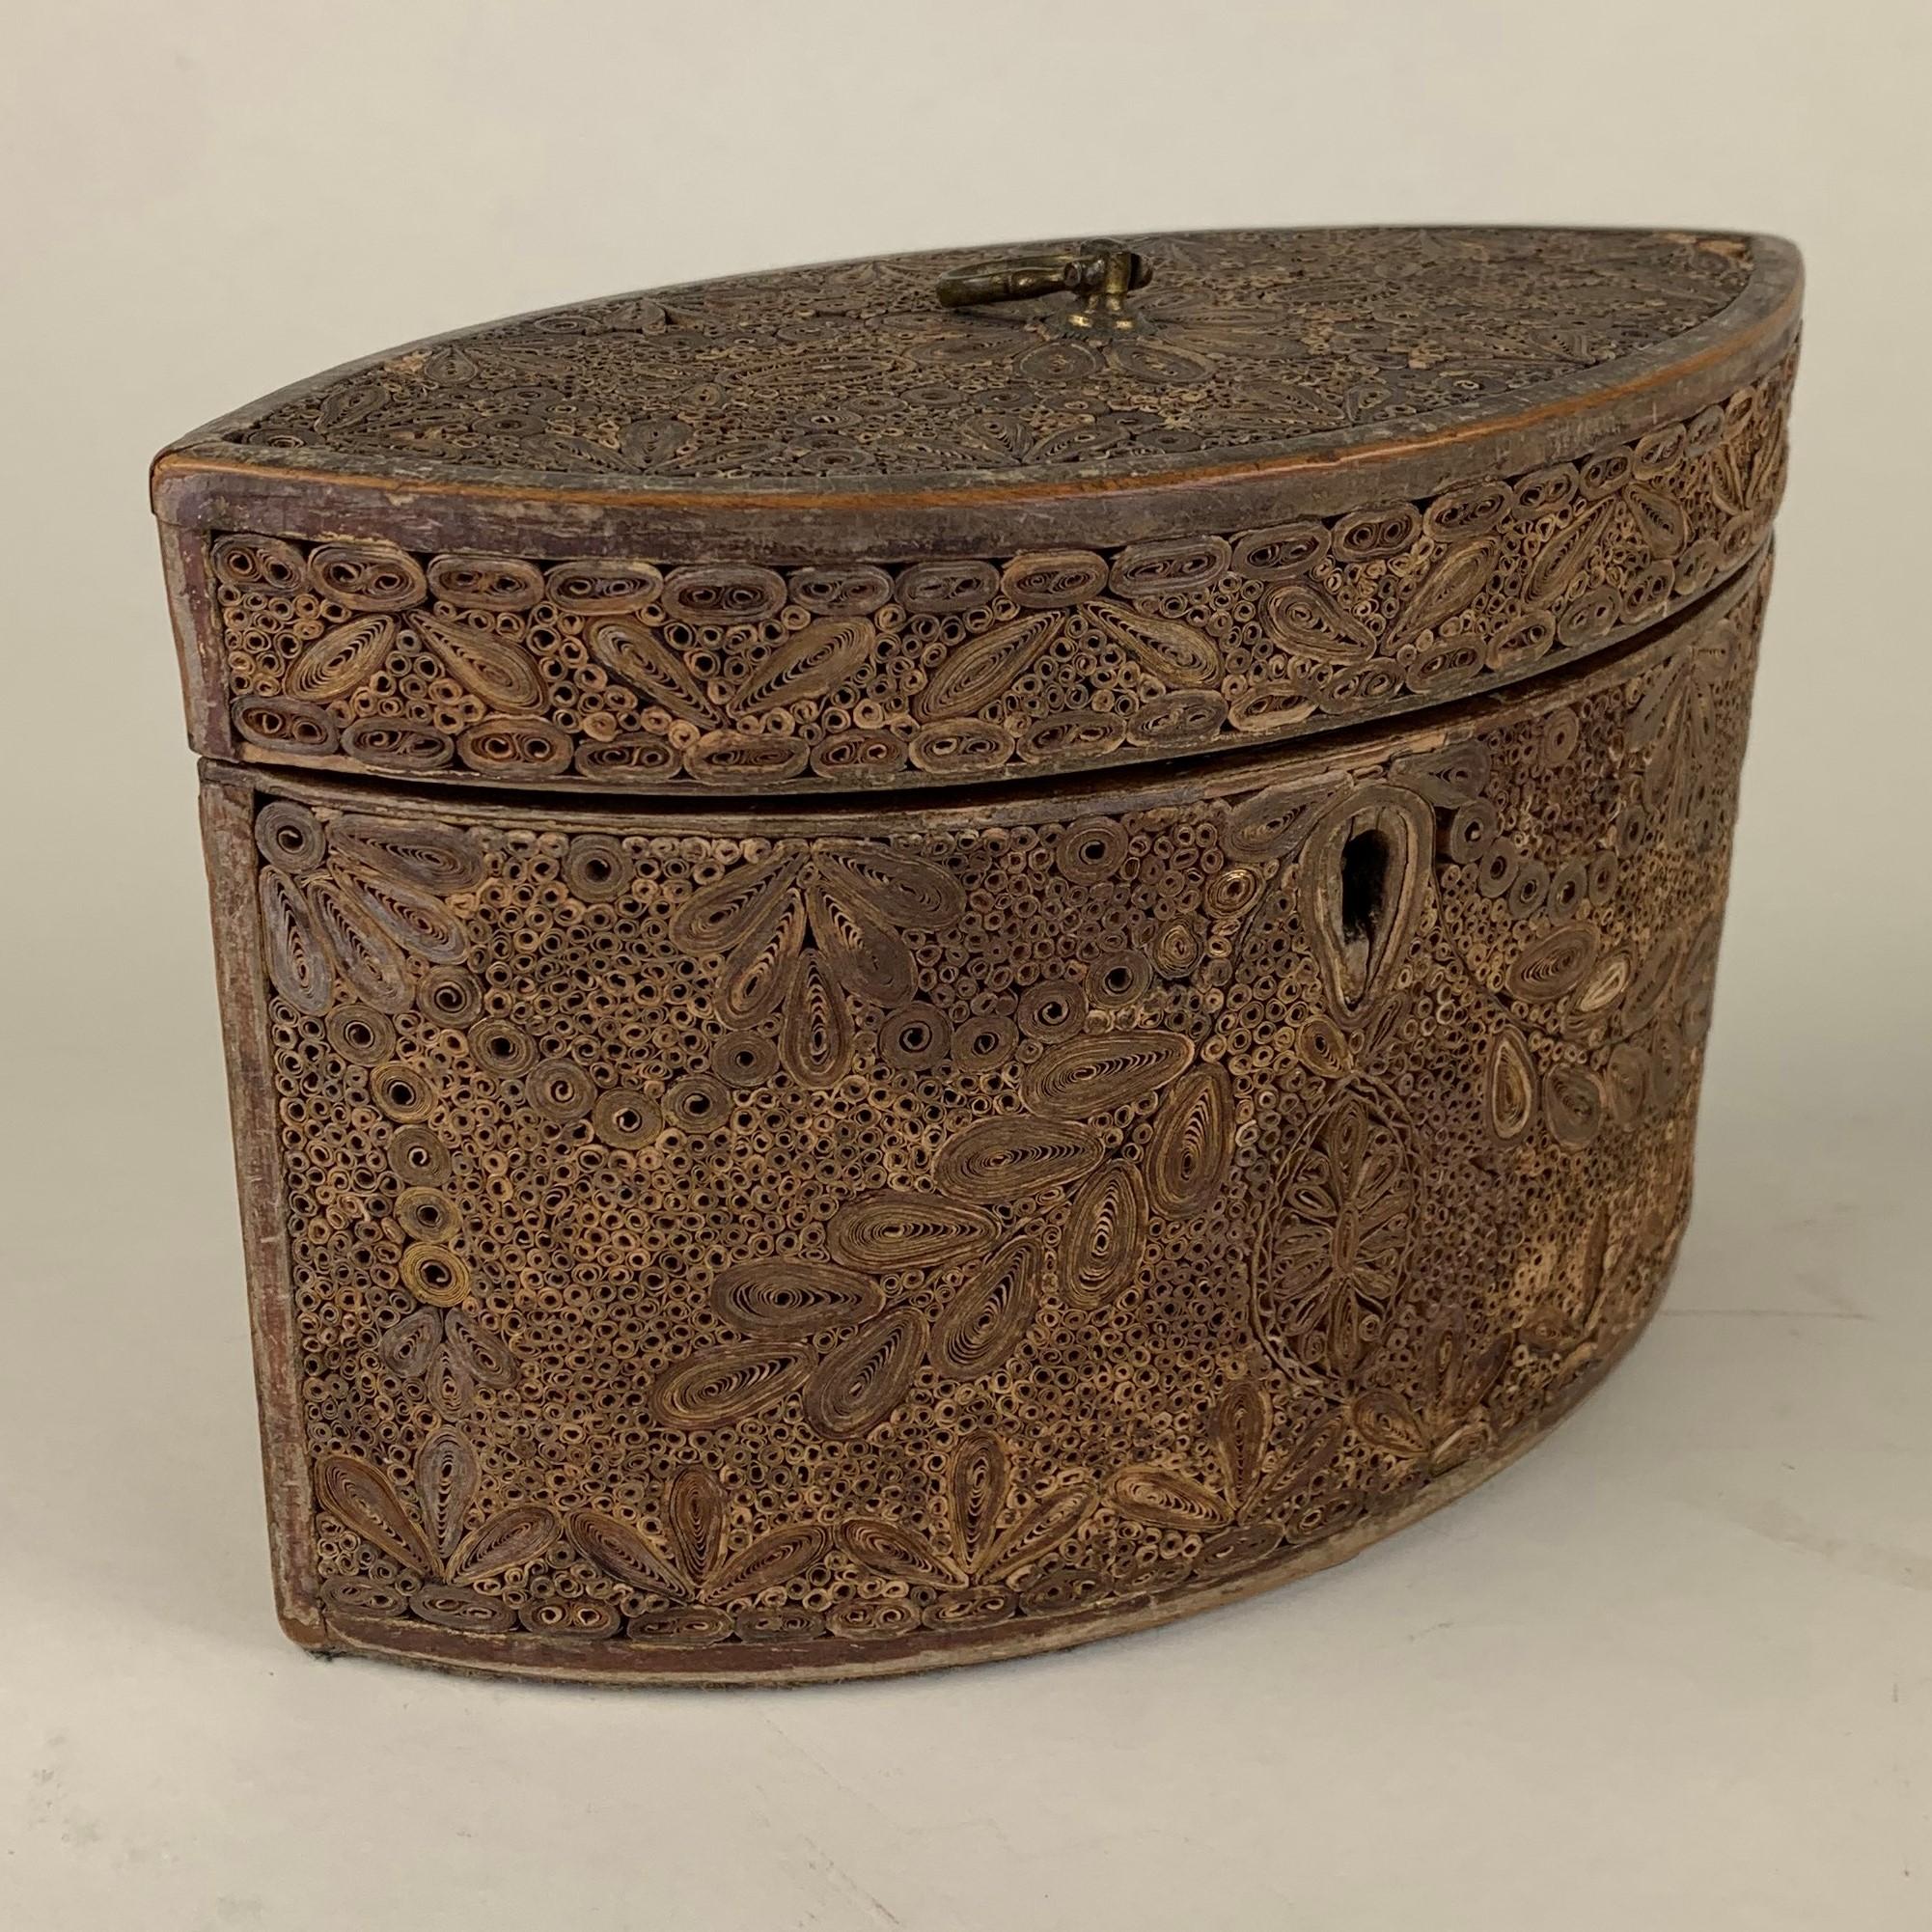 A fine quality rolled/scrolled paperwork single compartmemt tea caddy in good originl condition with minor losses. Decorated all-over with applied scrolls of gilt edged and coloured paper, with original green baize to base and original lock. the